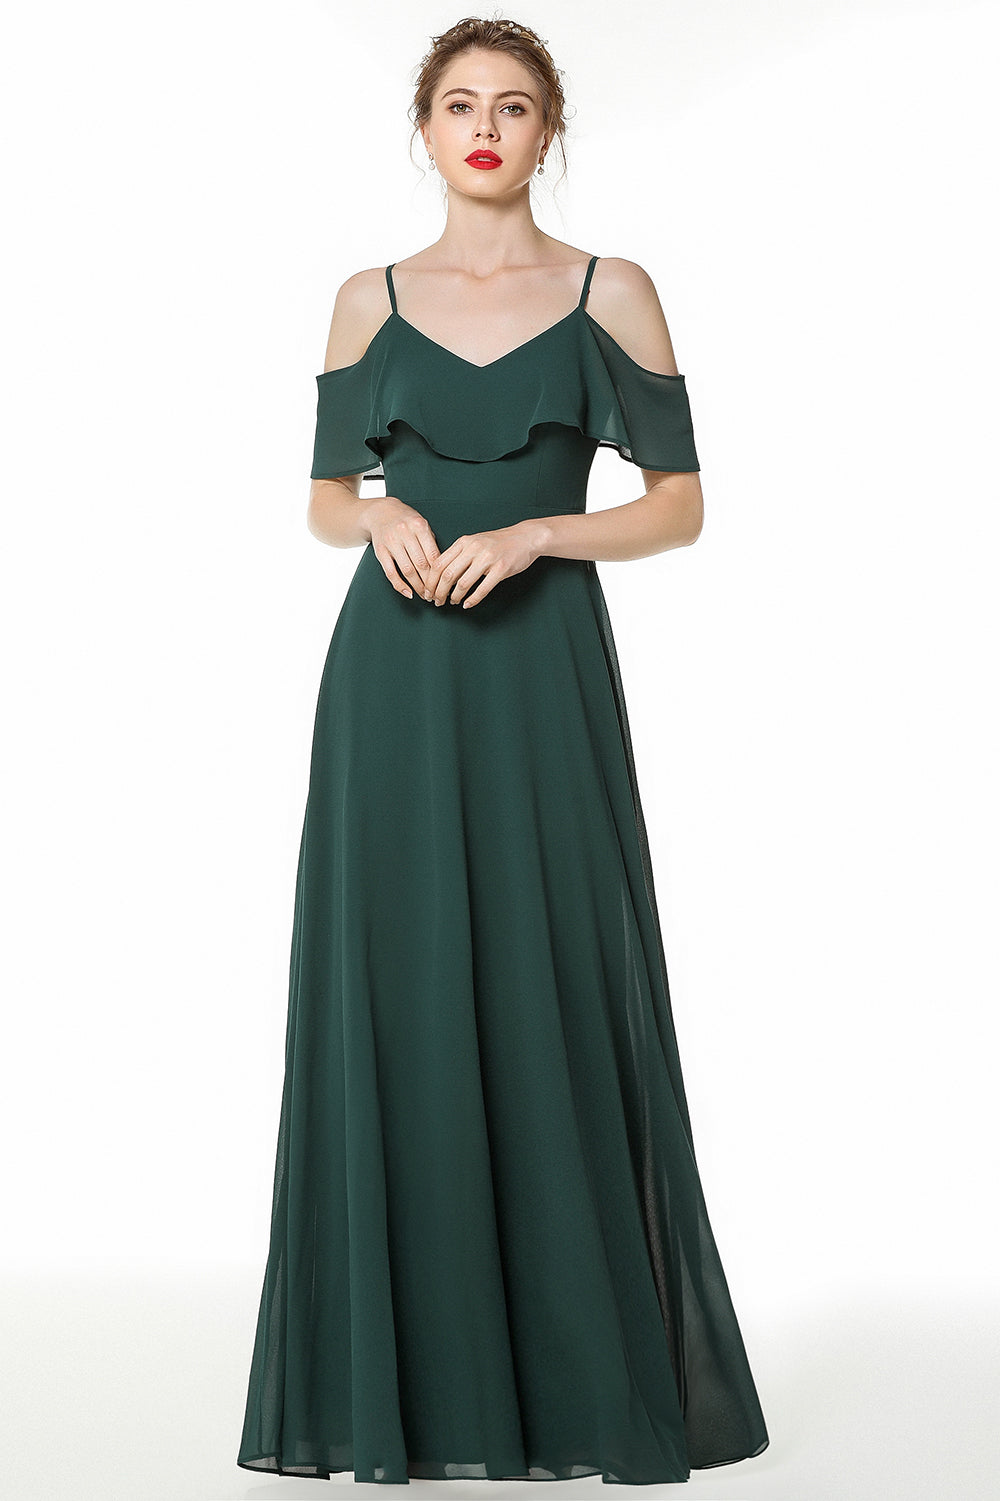 Simple Long A-line Spaghetti Straps Open Back Bridesmaid Dress with Sleeves-BIZTUNNEL